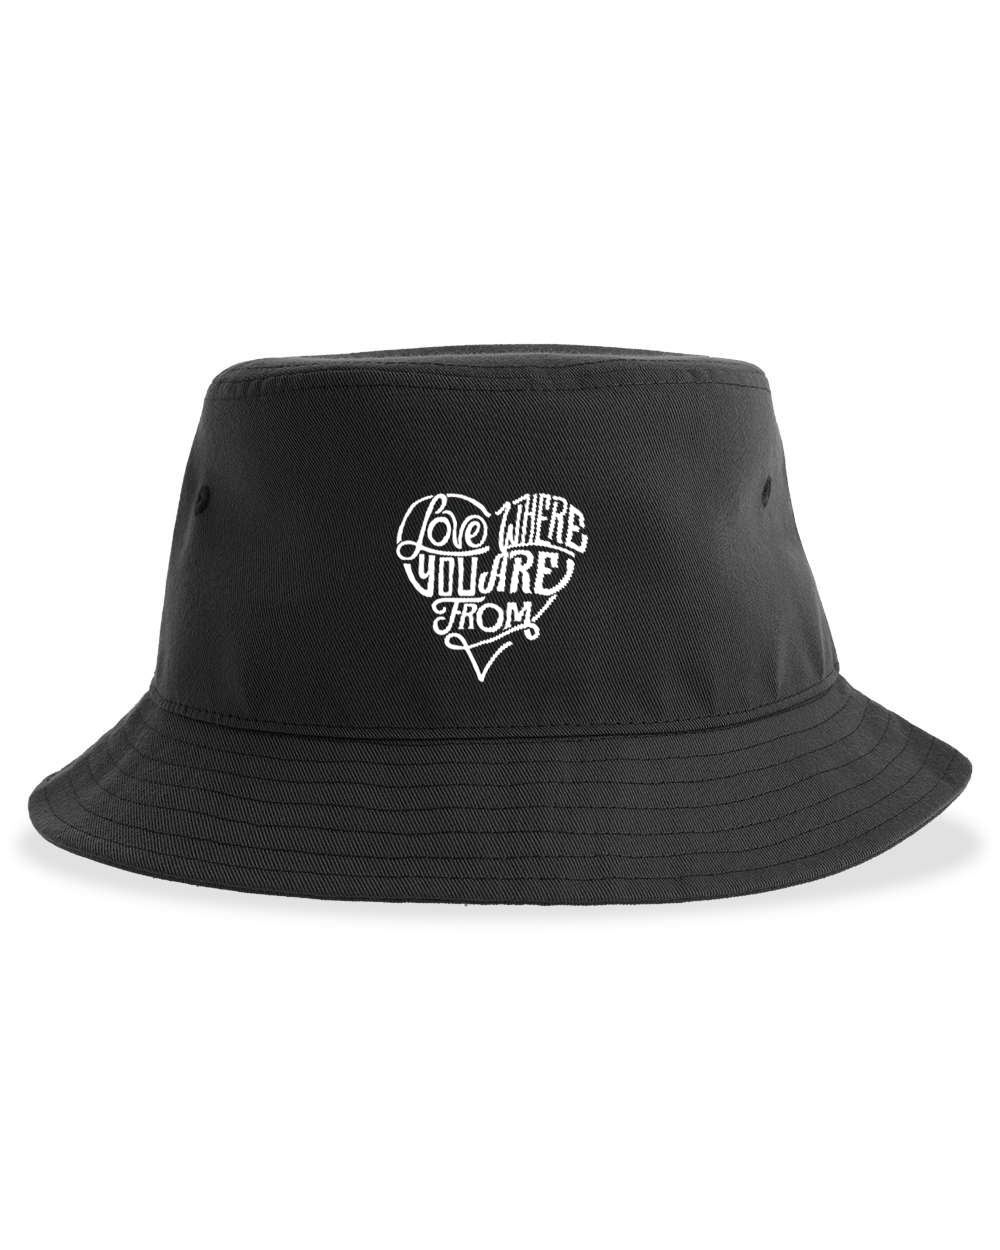 Love Where You Are From (Black) / Bucket Hat - Route One Apparel